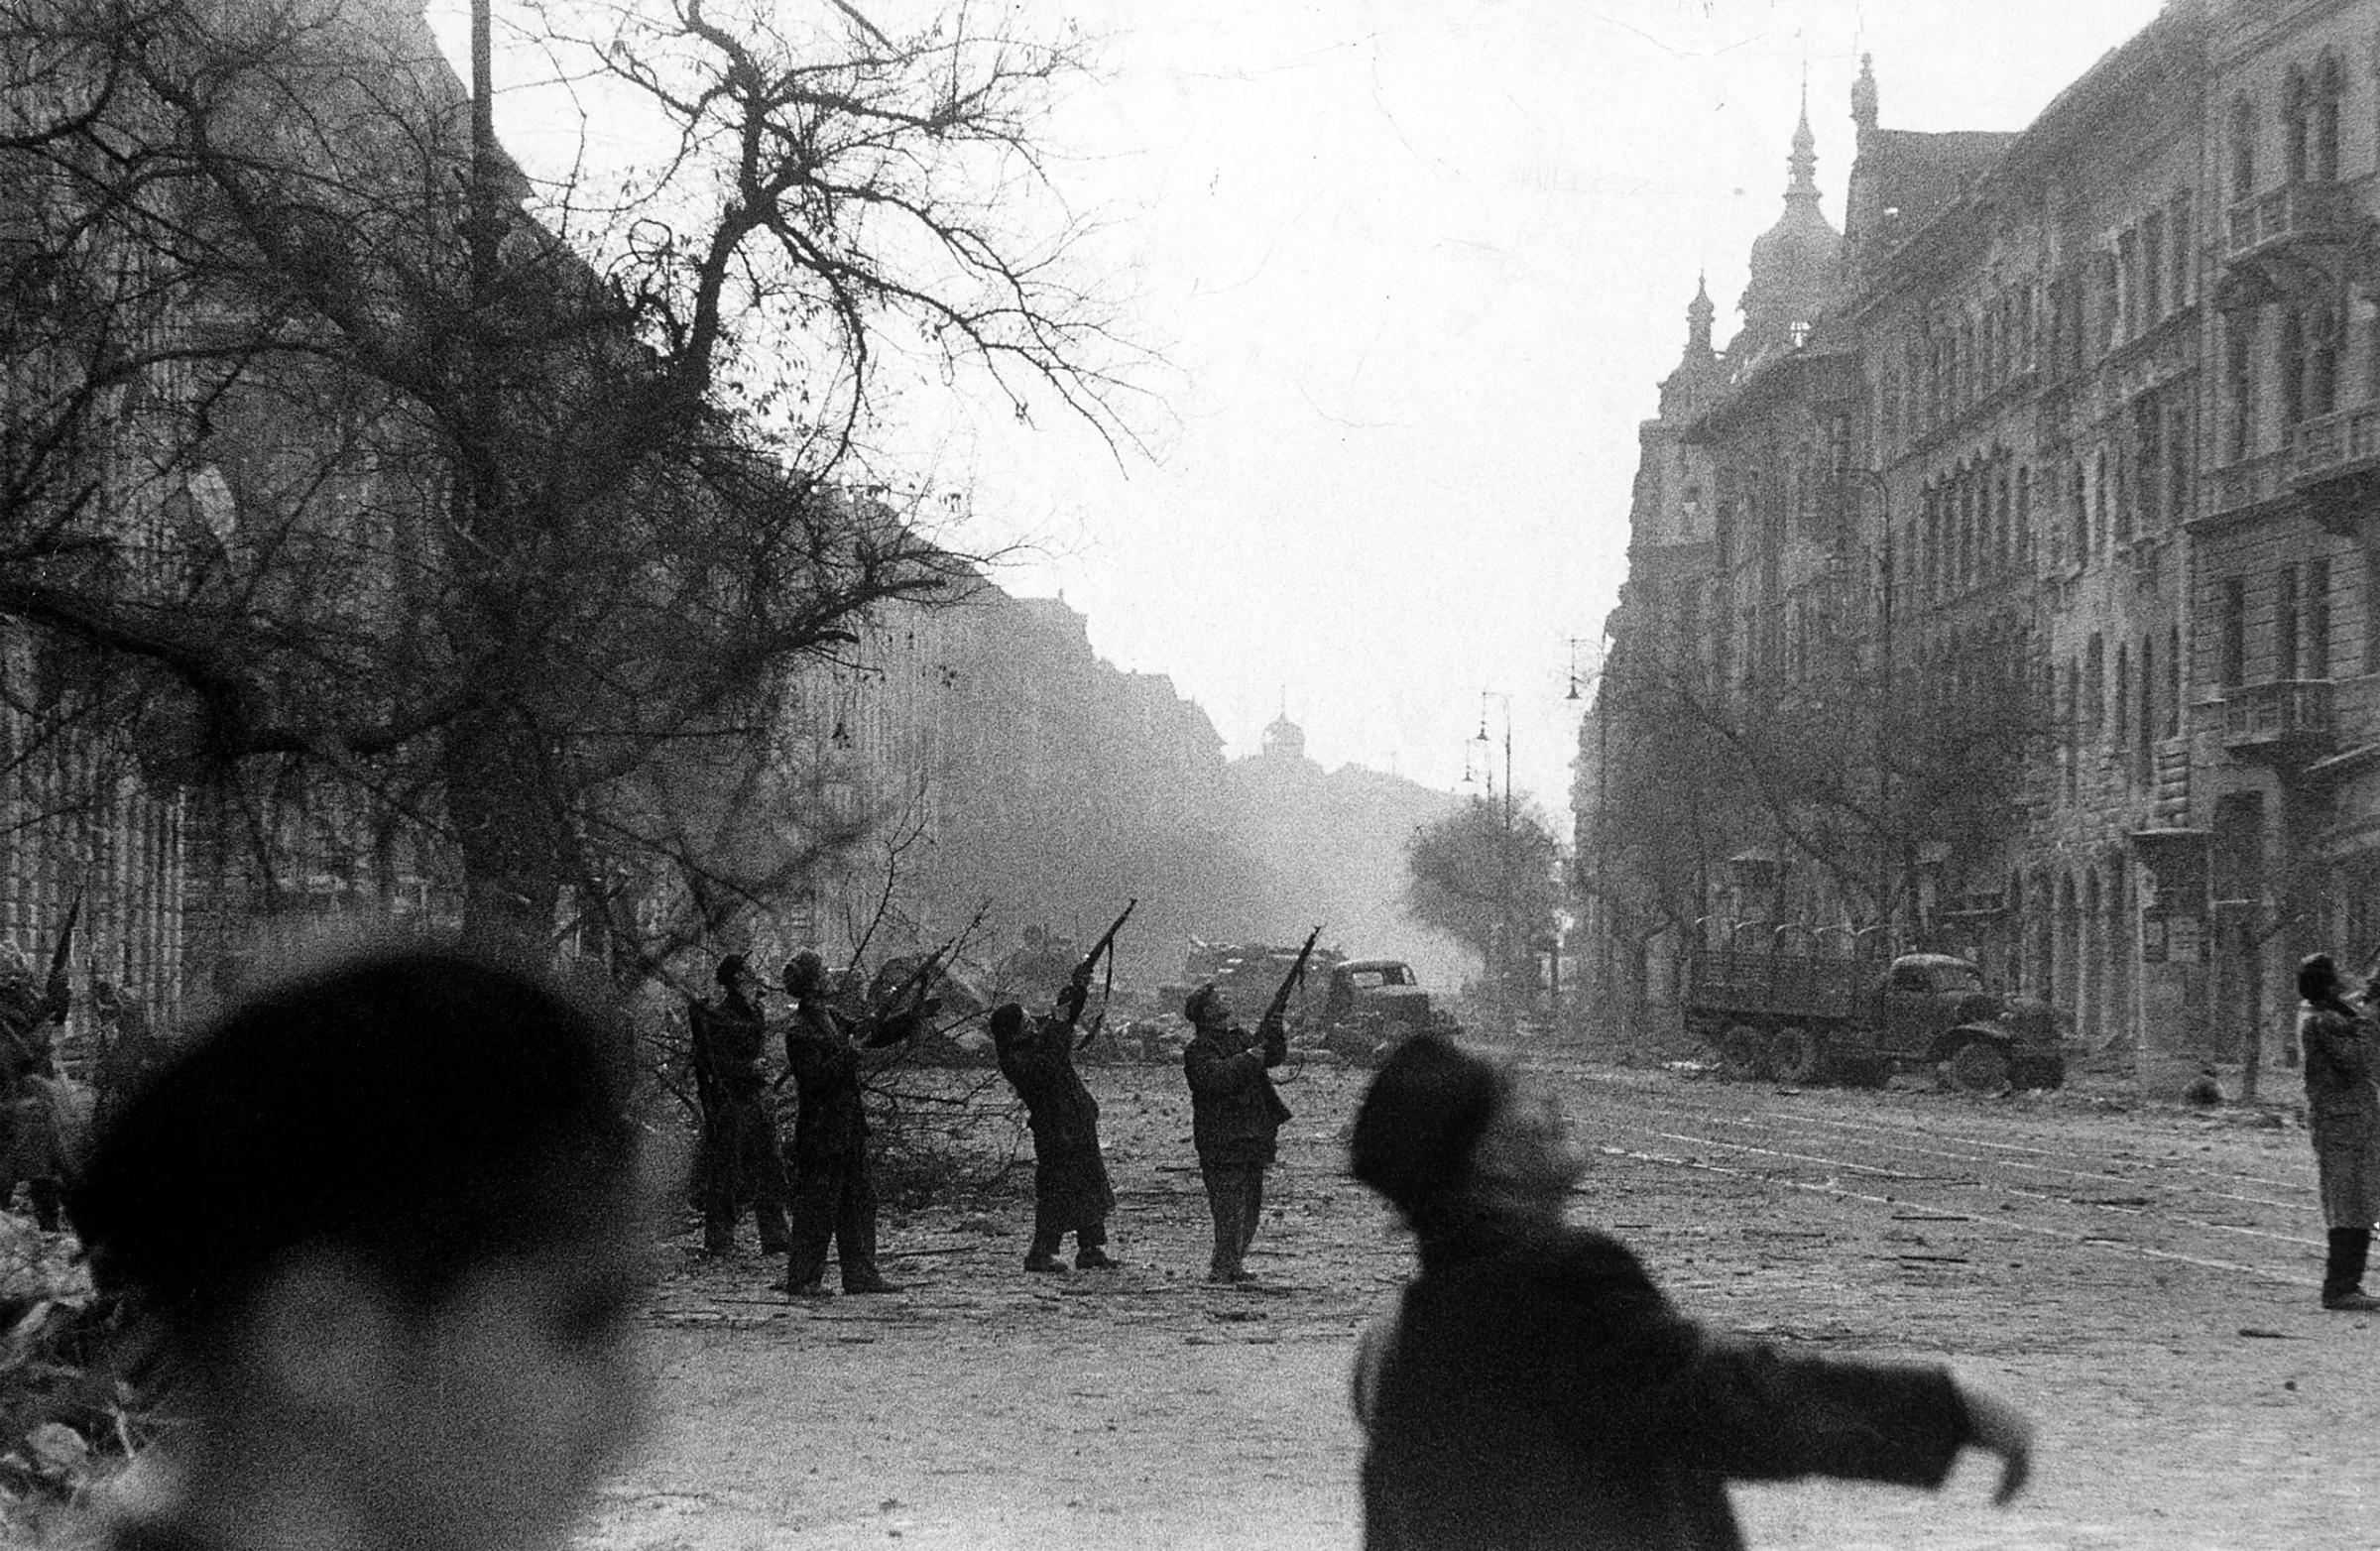 Hungarian resistance fighters fire toward a Russian observation plane shortly before the Soviet annexation of Hungarian territory, 1956.